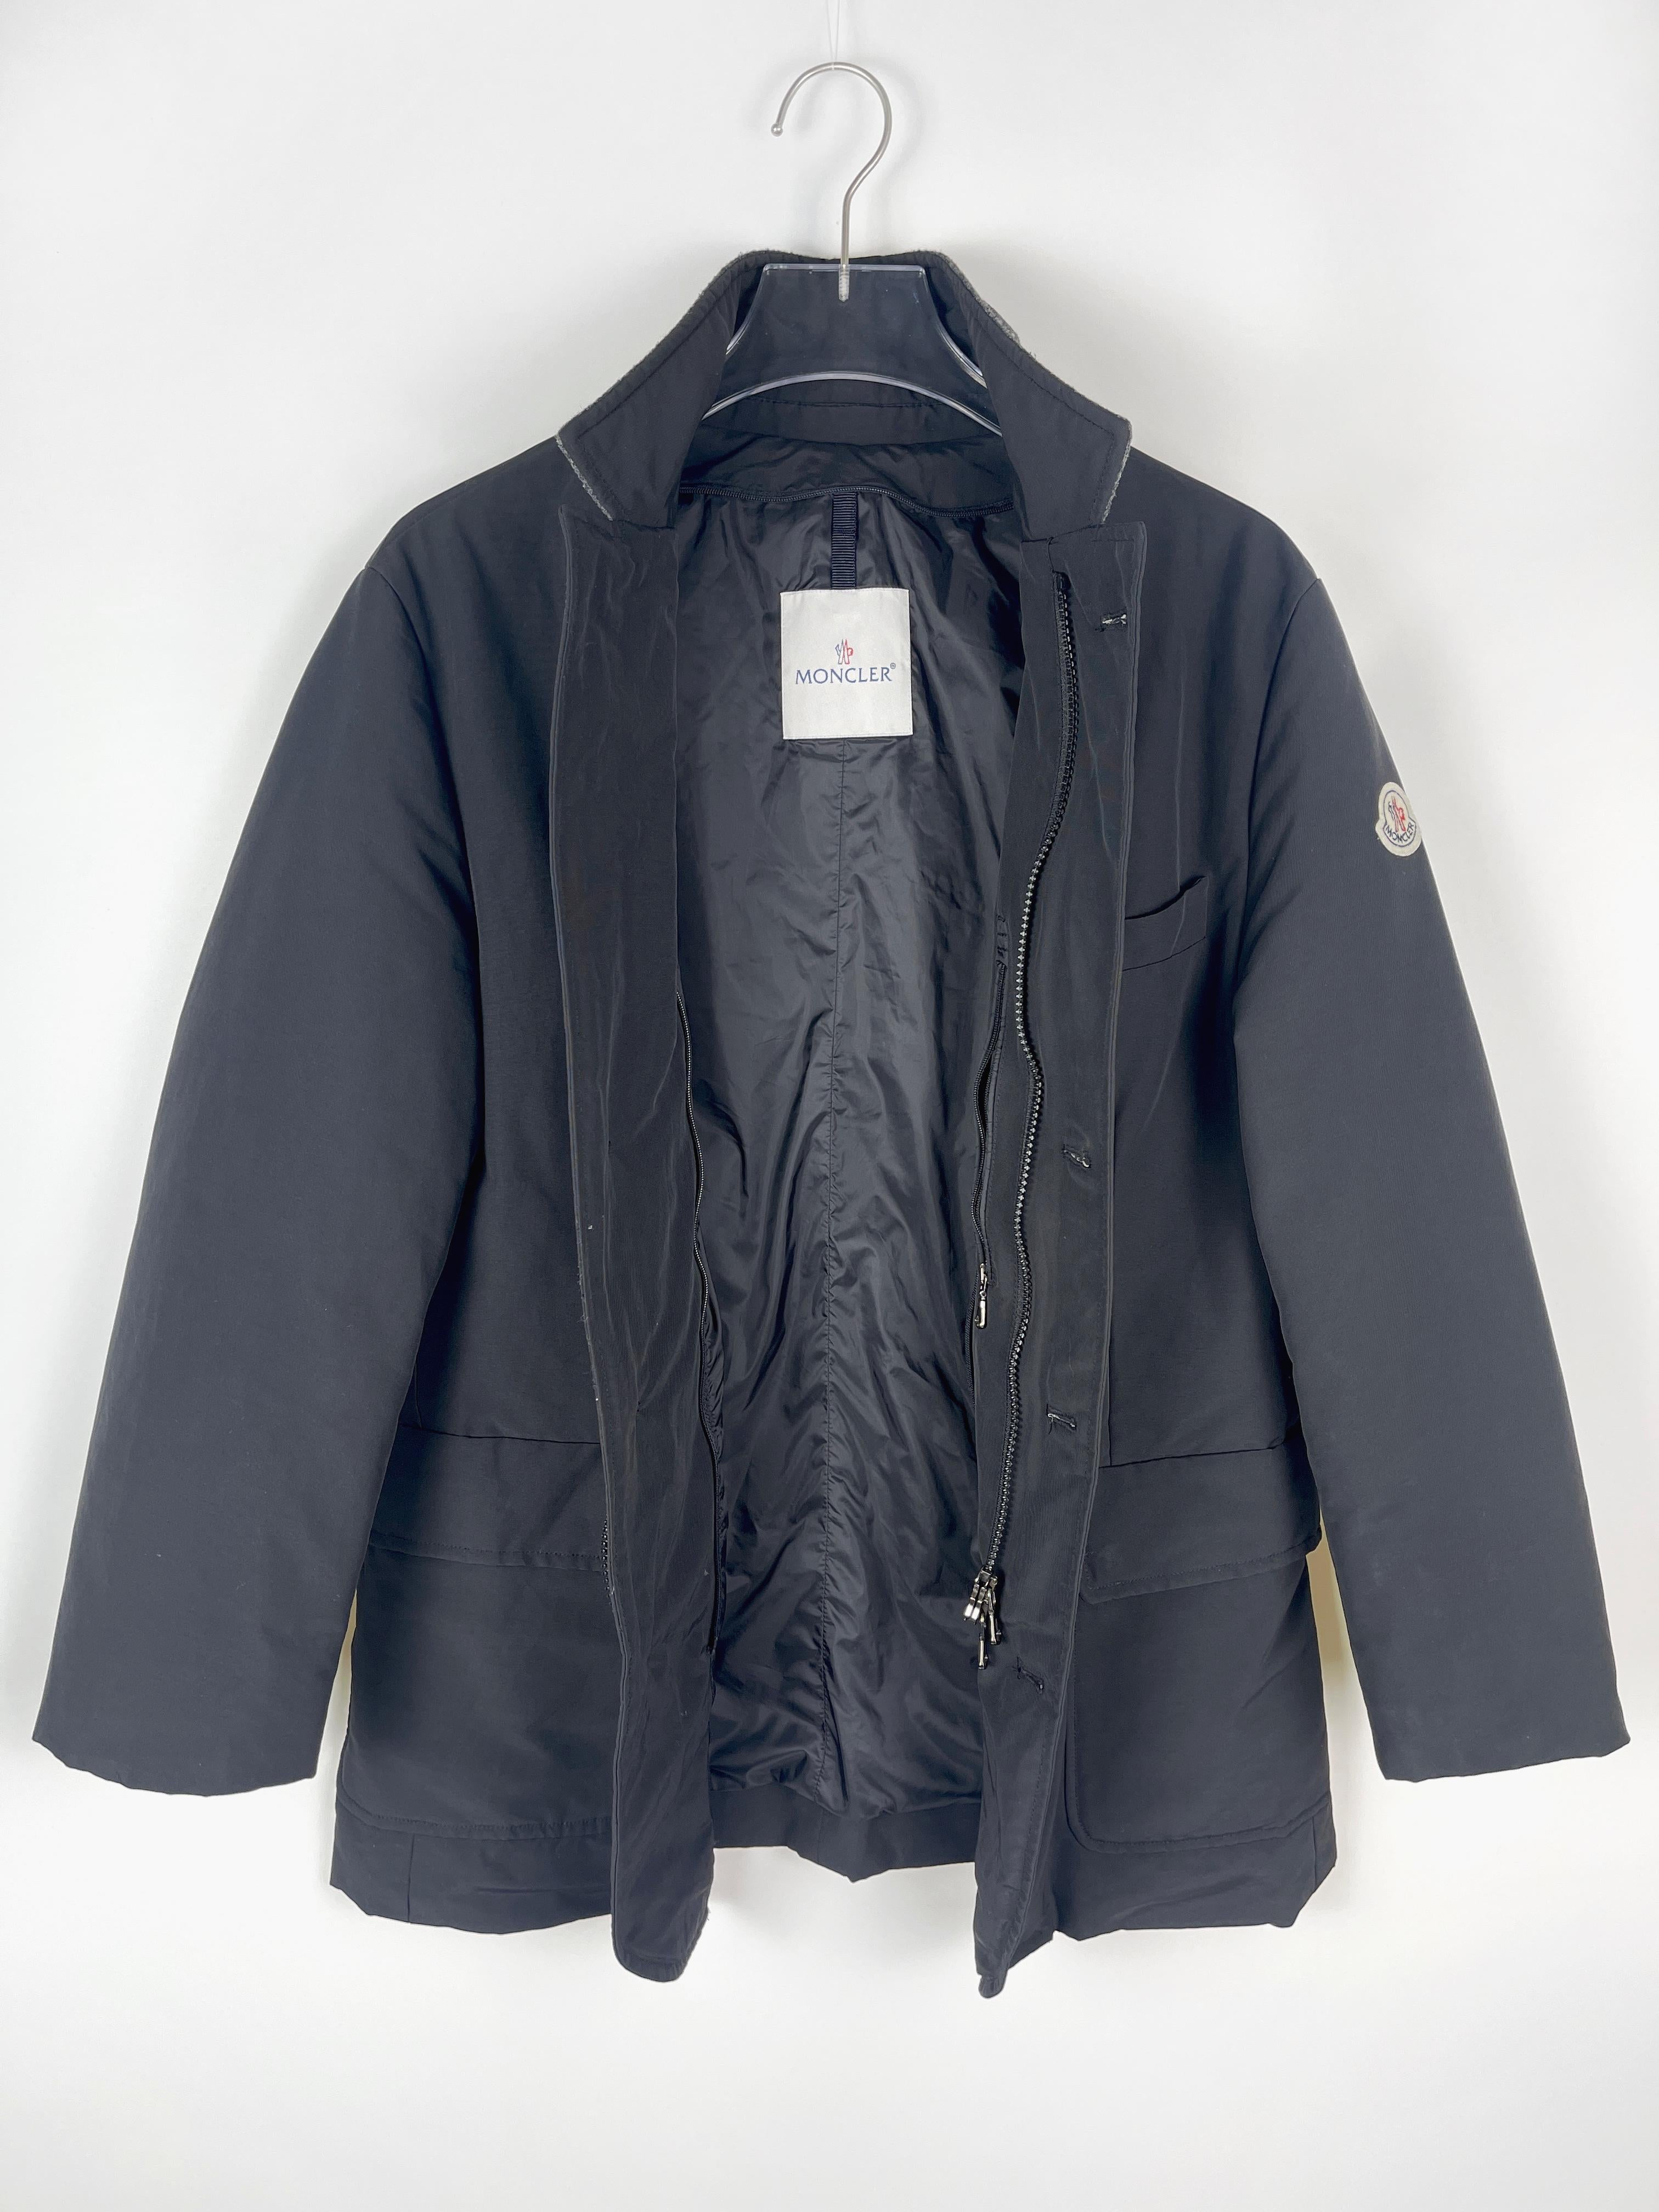 Moncler 2000's Down Parka In Excellent Condition For Sale In Tương Mai Ward, Hoang Mai District